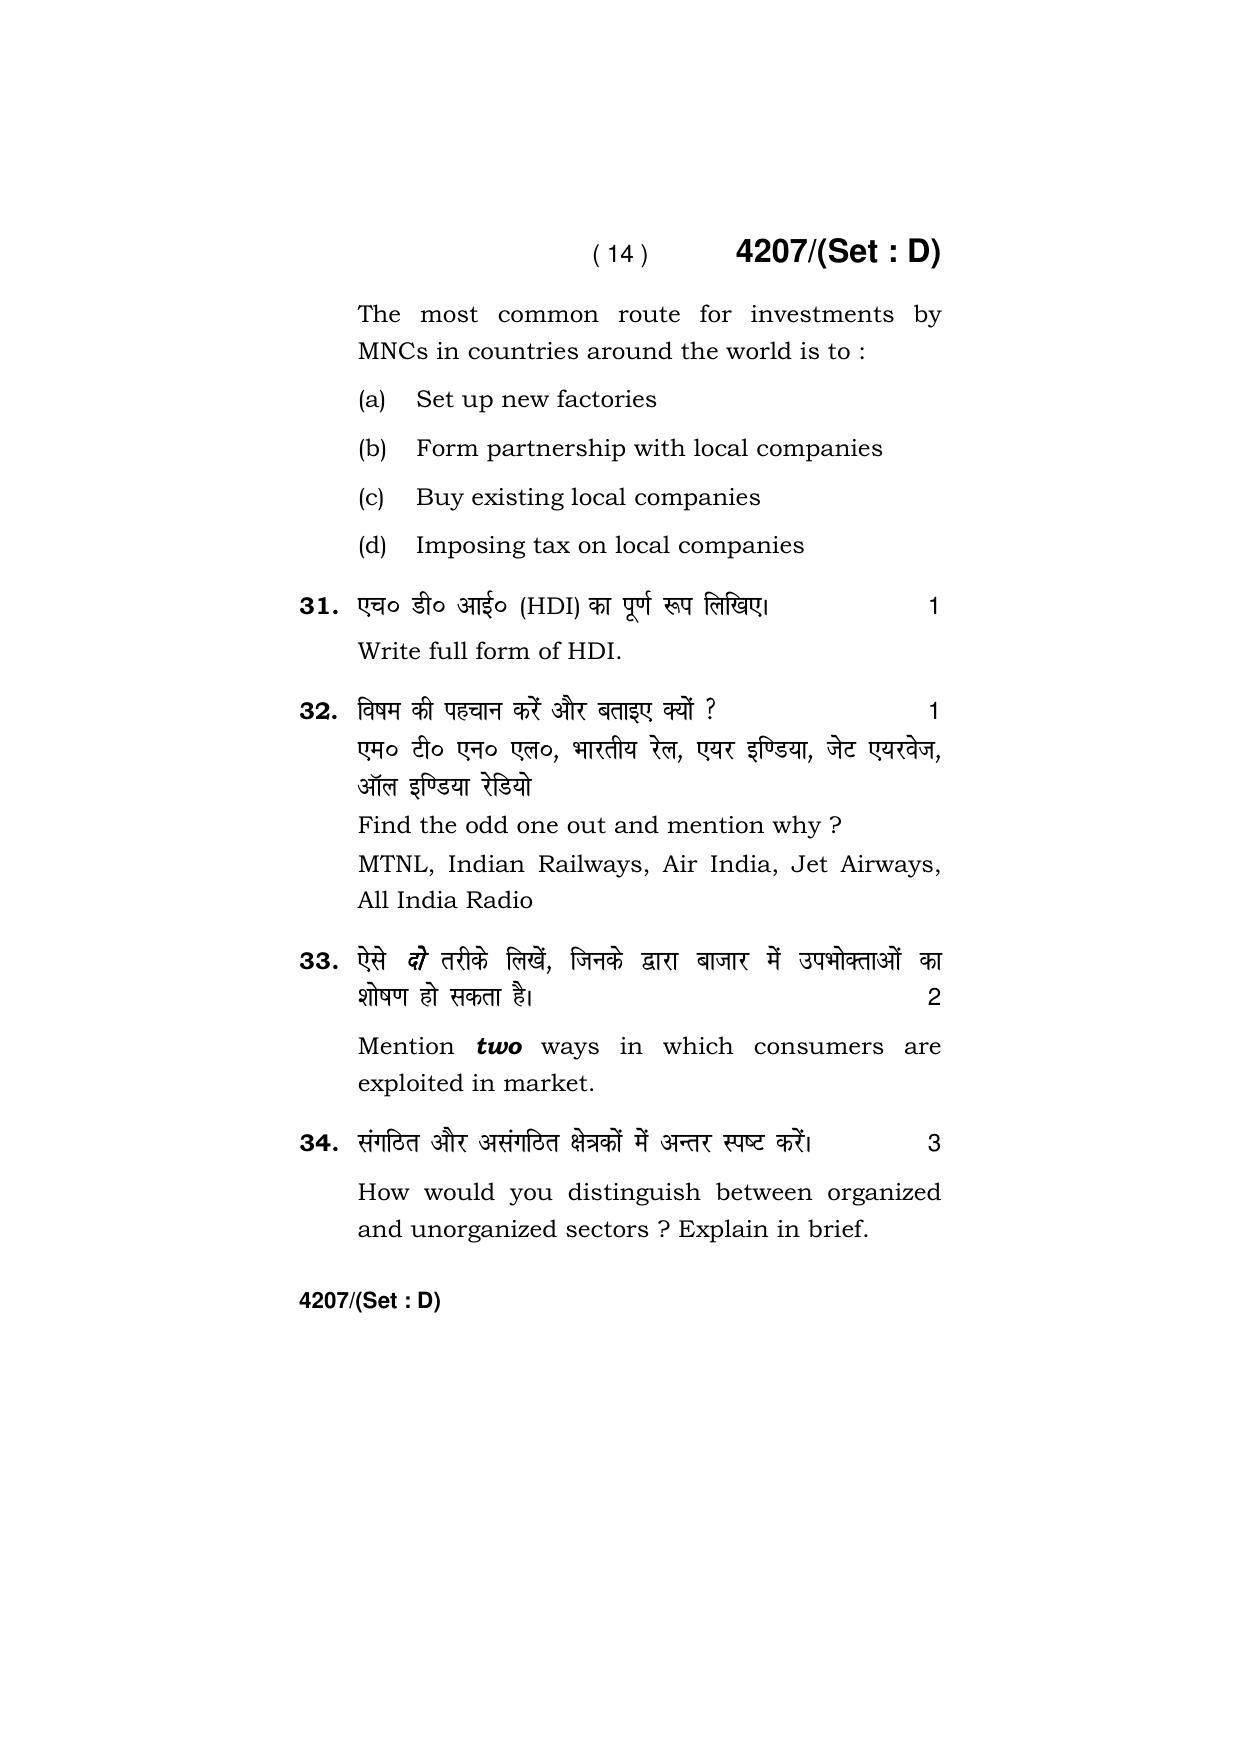 Haryana Board HBSE Class 10 Social Science (All Set) 2019 Question Paper - Page 59